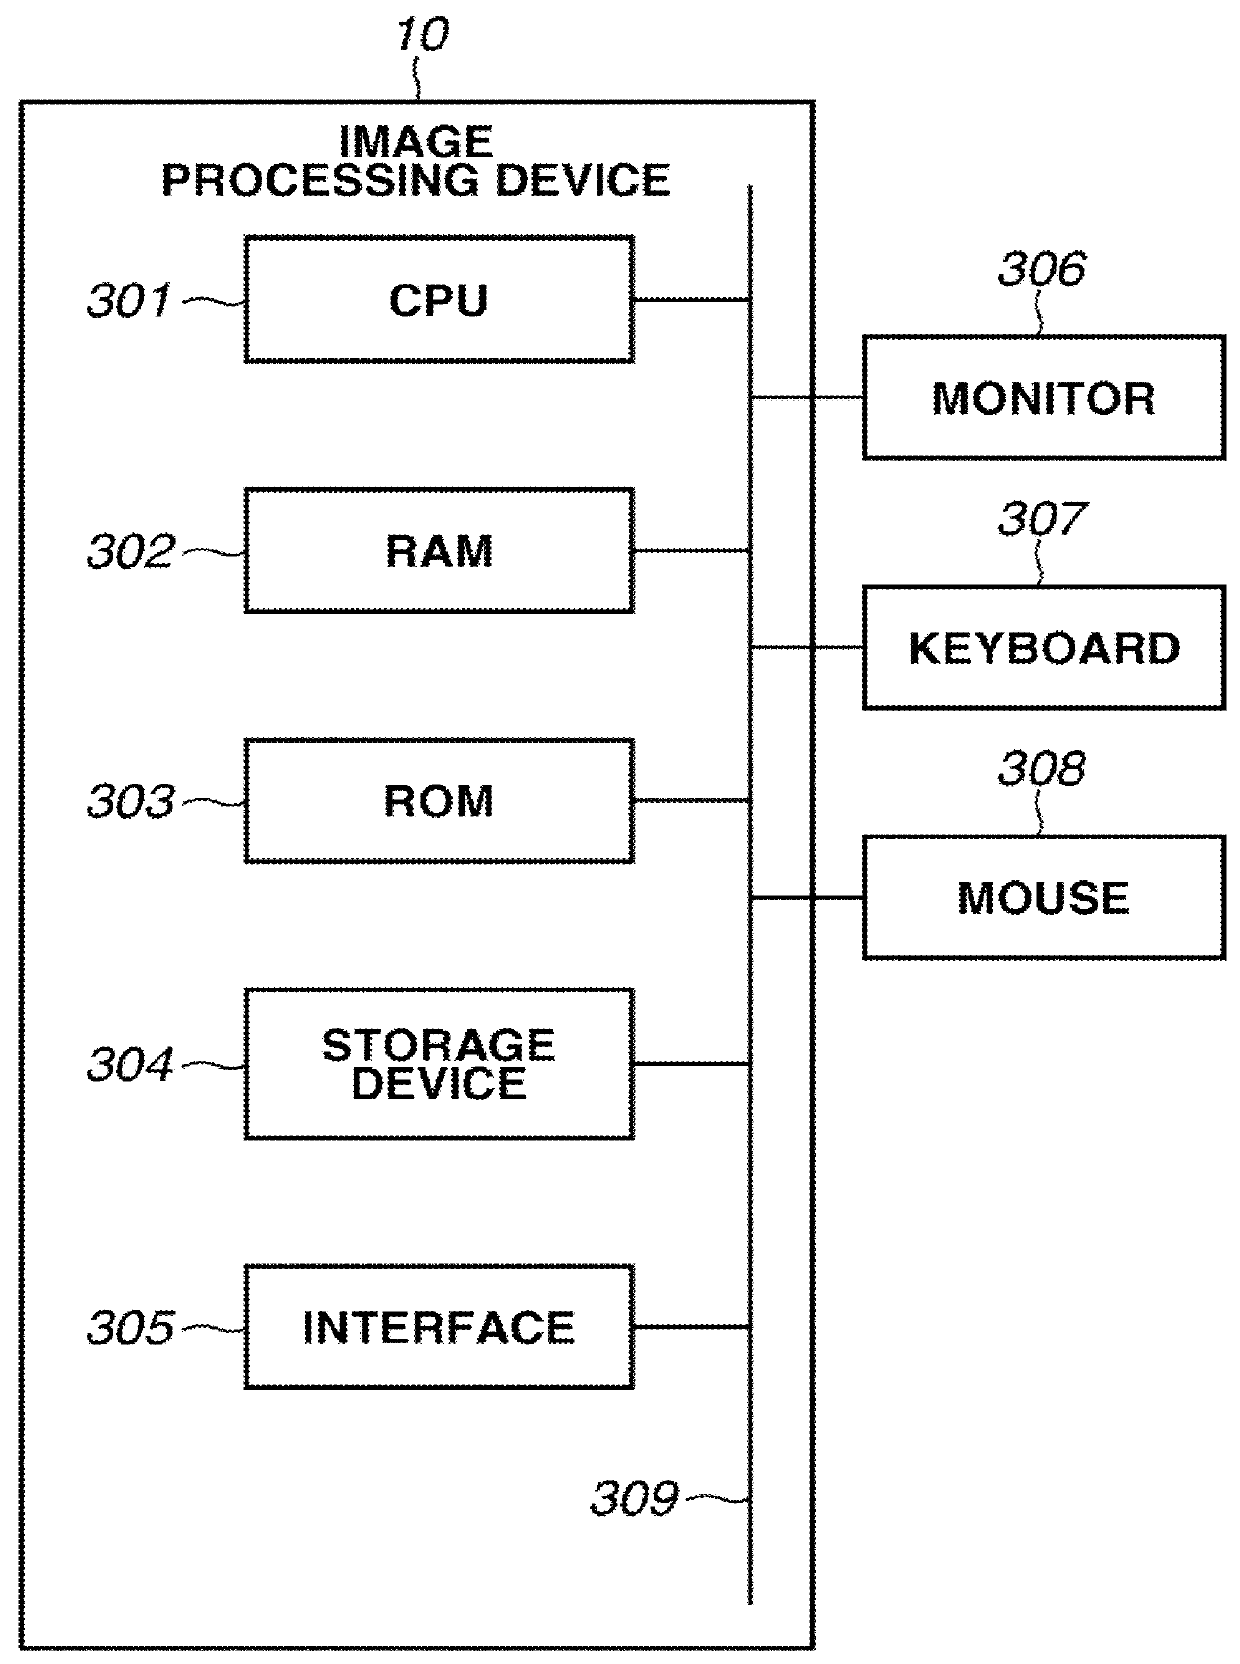 Image processing device, imaging system, image processing method, and program for causing computer to perform image processing